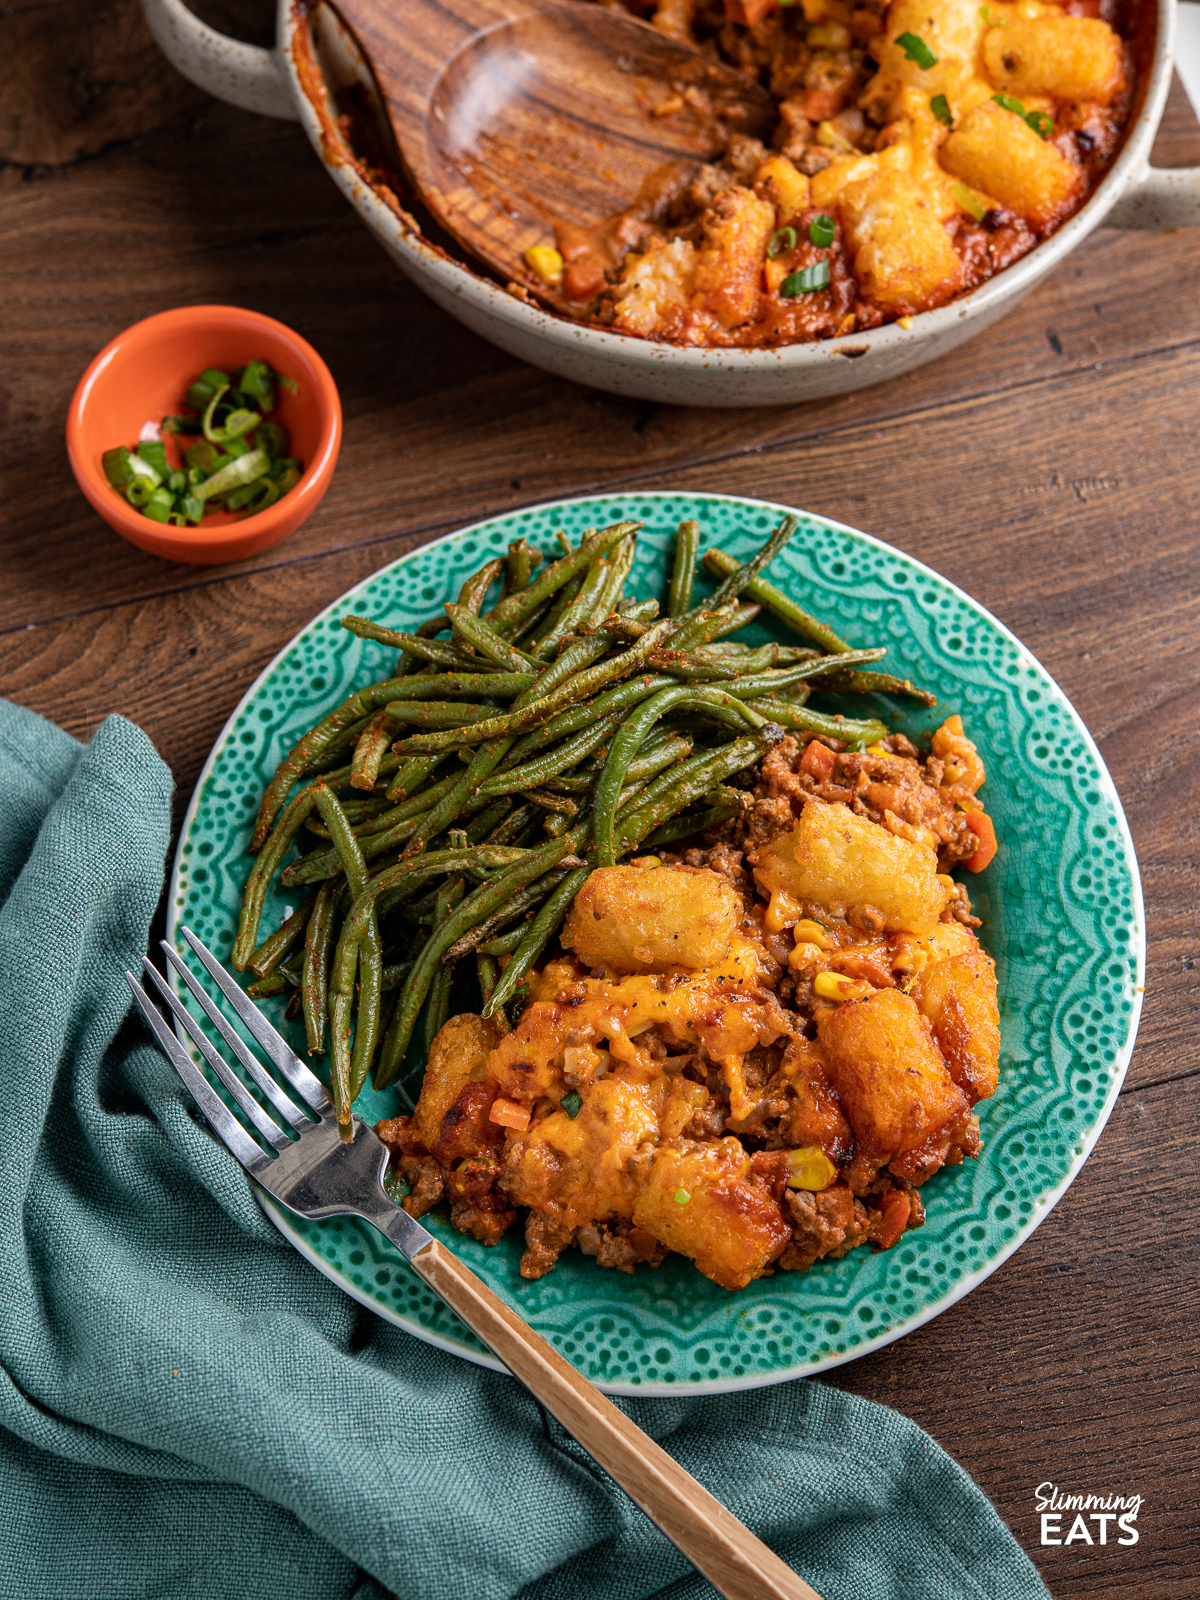 Tater Tot Casserole served up on a turquoise plate with roasted green beans, fork placed diagonally at front of plate